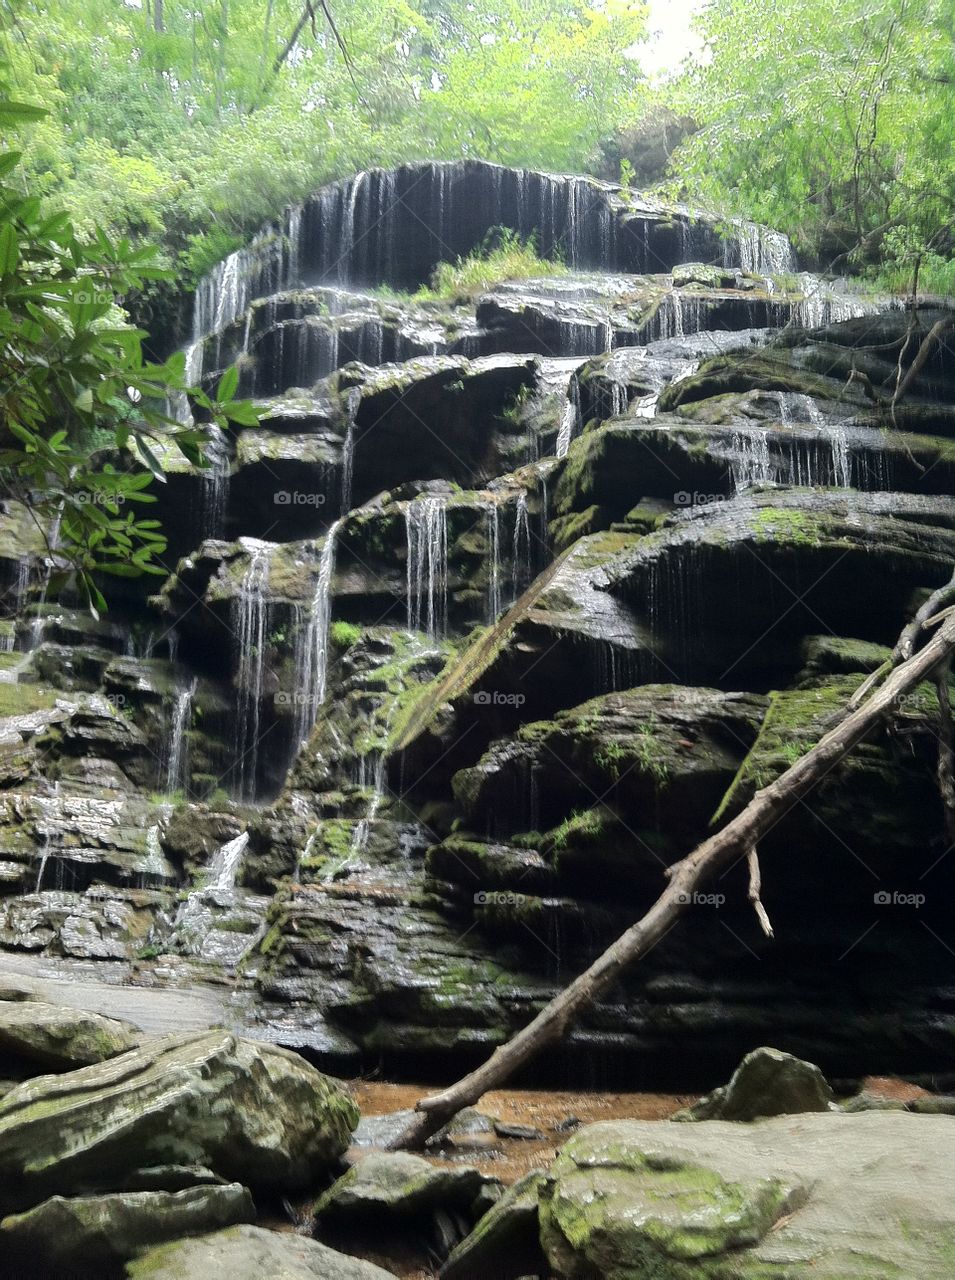 Station Cove Falls. Oconee Station State Park, SC